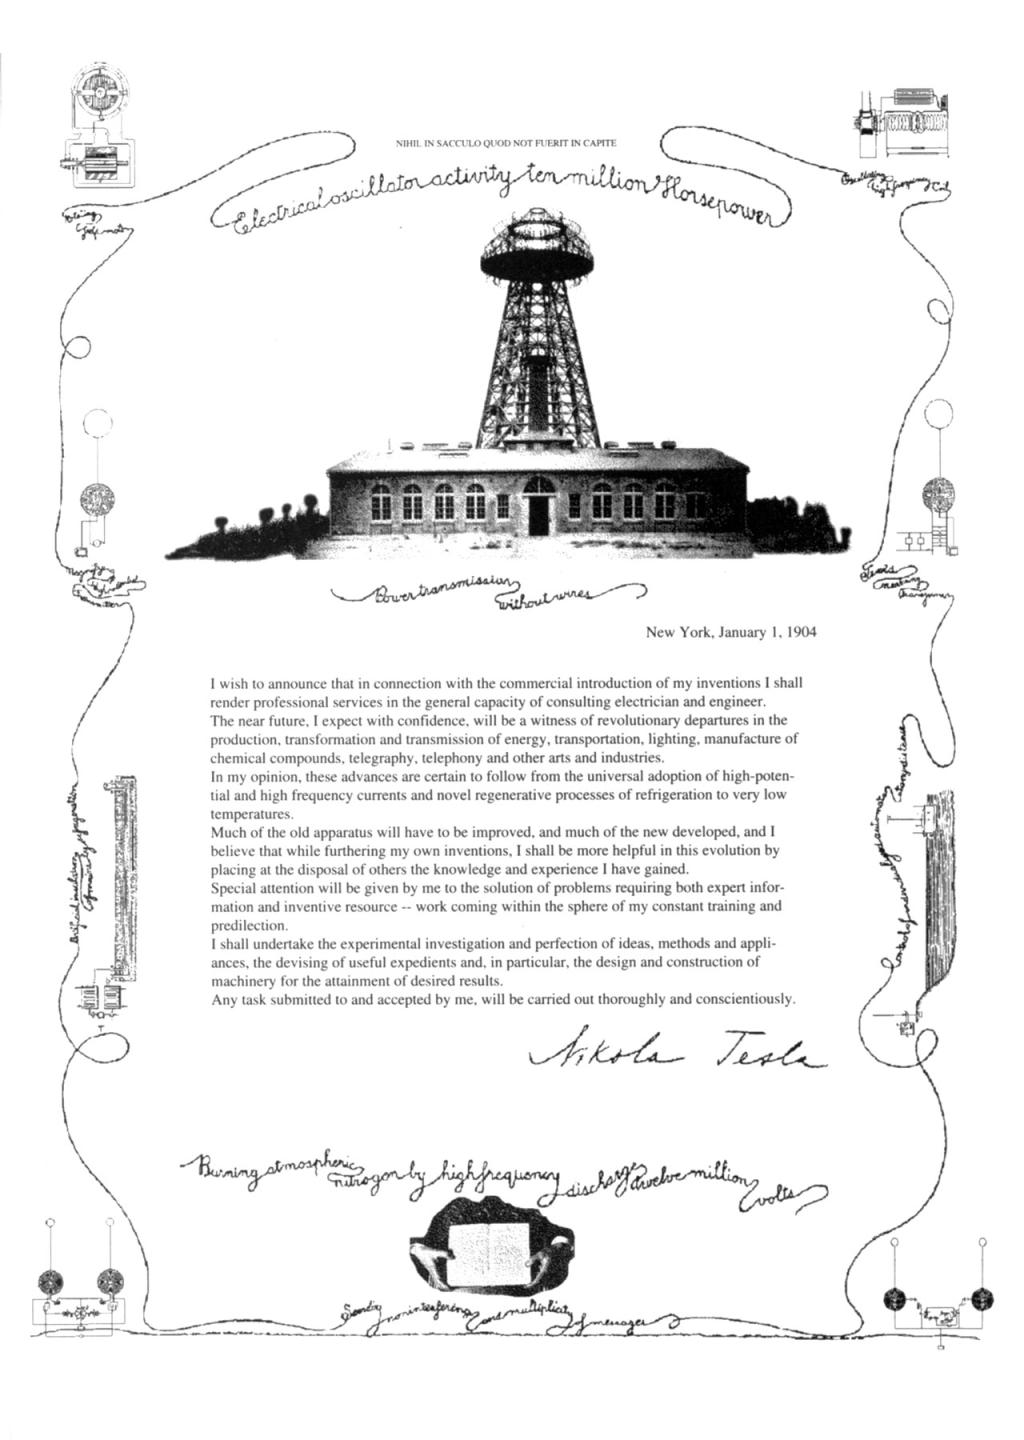 Page from the Tesla Manifesto